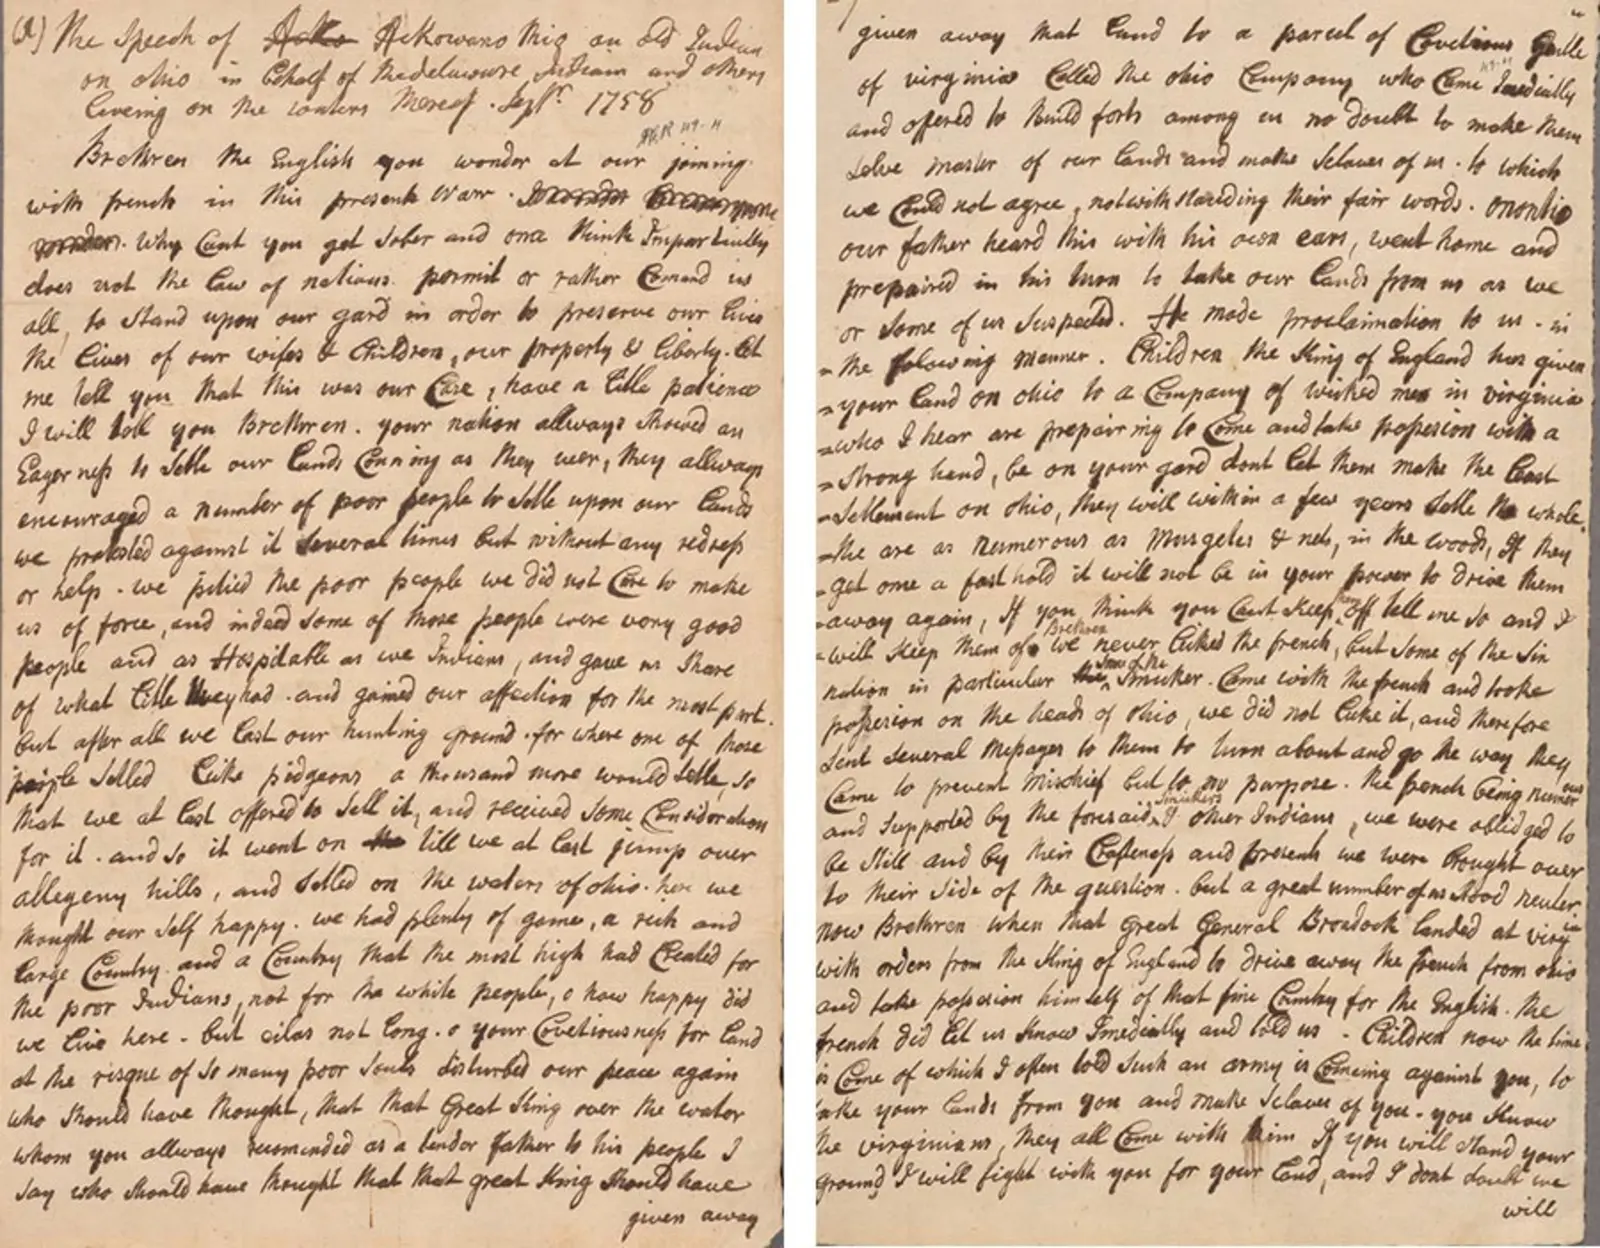 The first two pages of The Speech of Ackowanothio